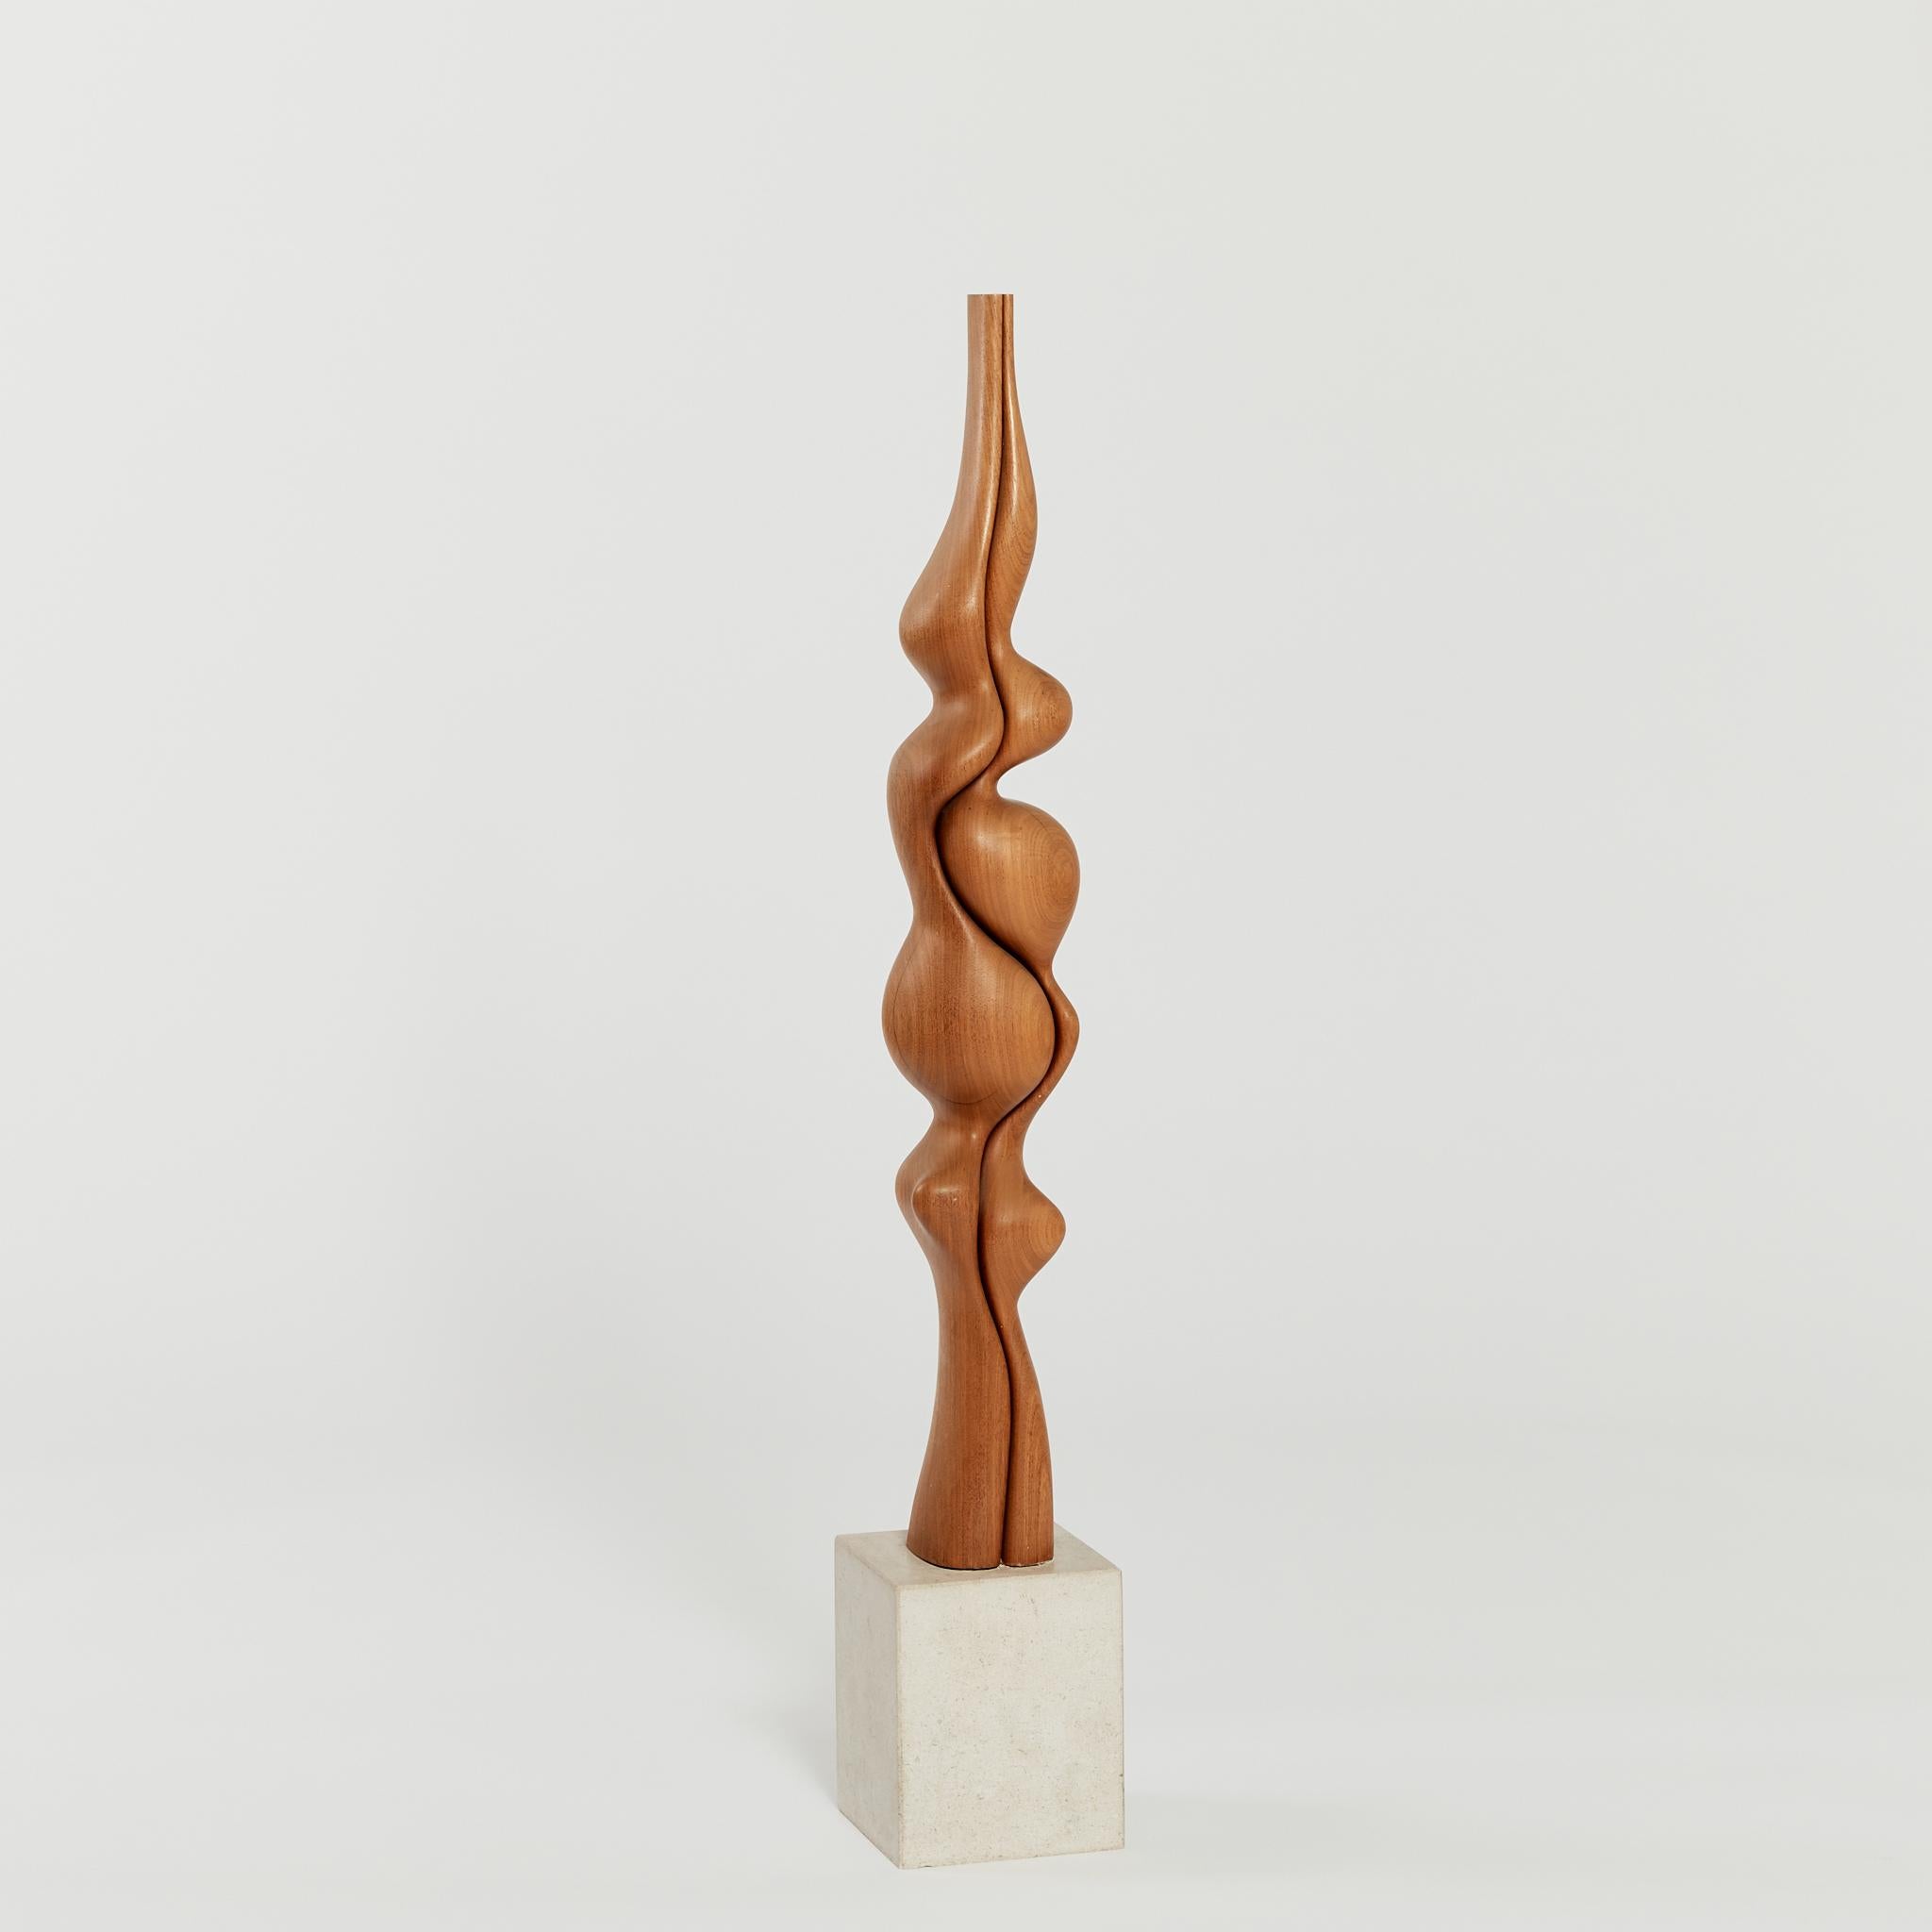 Tall Biomorphic Wood Floor Sculpture with Concrete Plinth 8